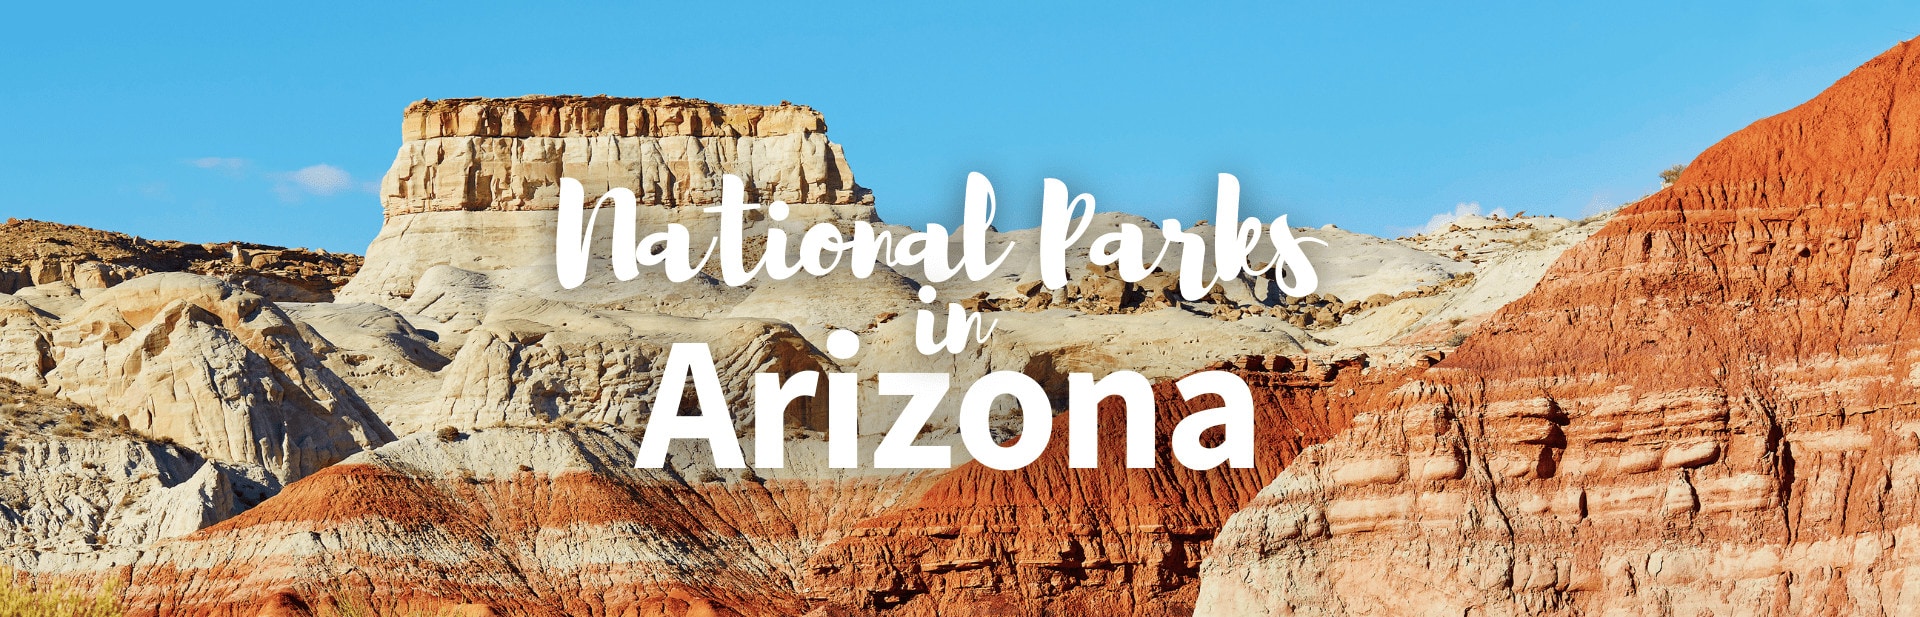 10 Best National Parks in Arizona for Hikers and Nature Lovers